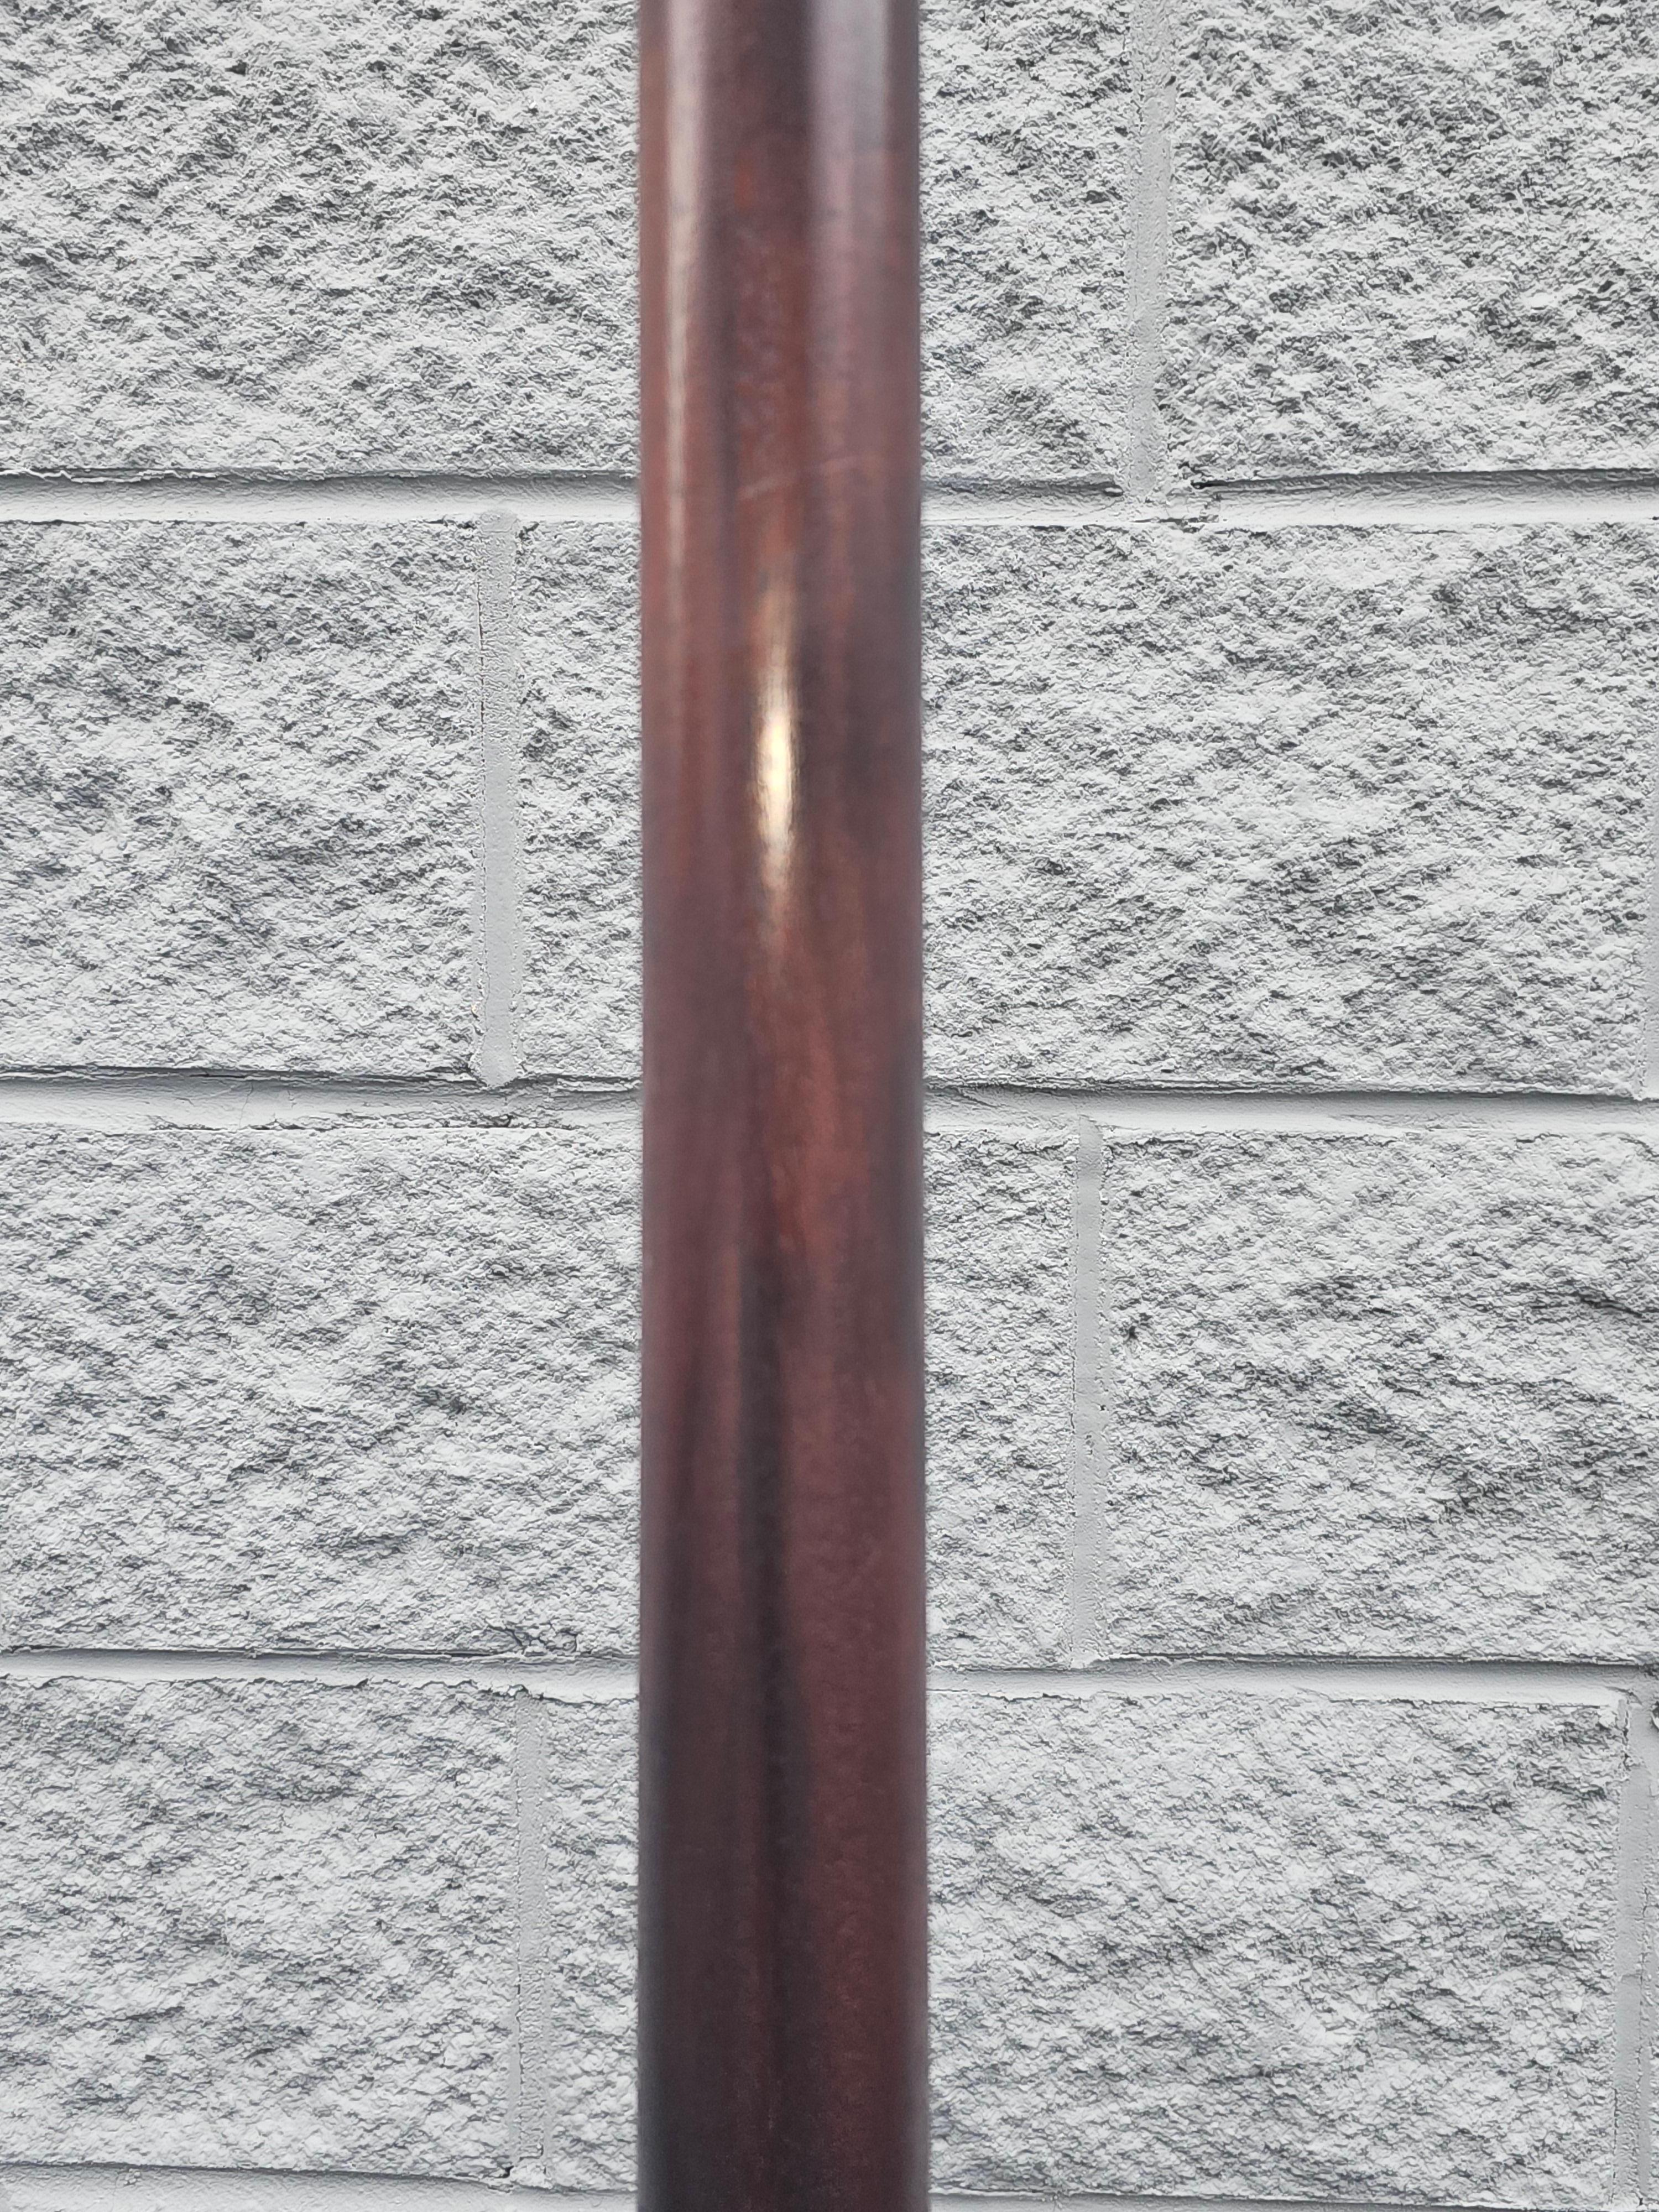 A Mid-20th Century Mahogany and Brass Inset Dual Lights Floor Lamp measuring 13.5